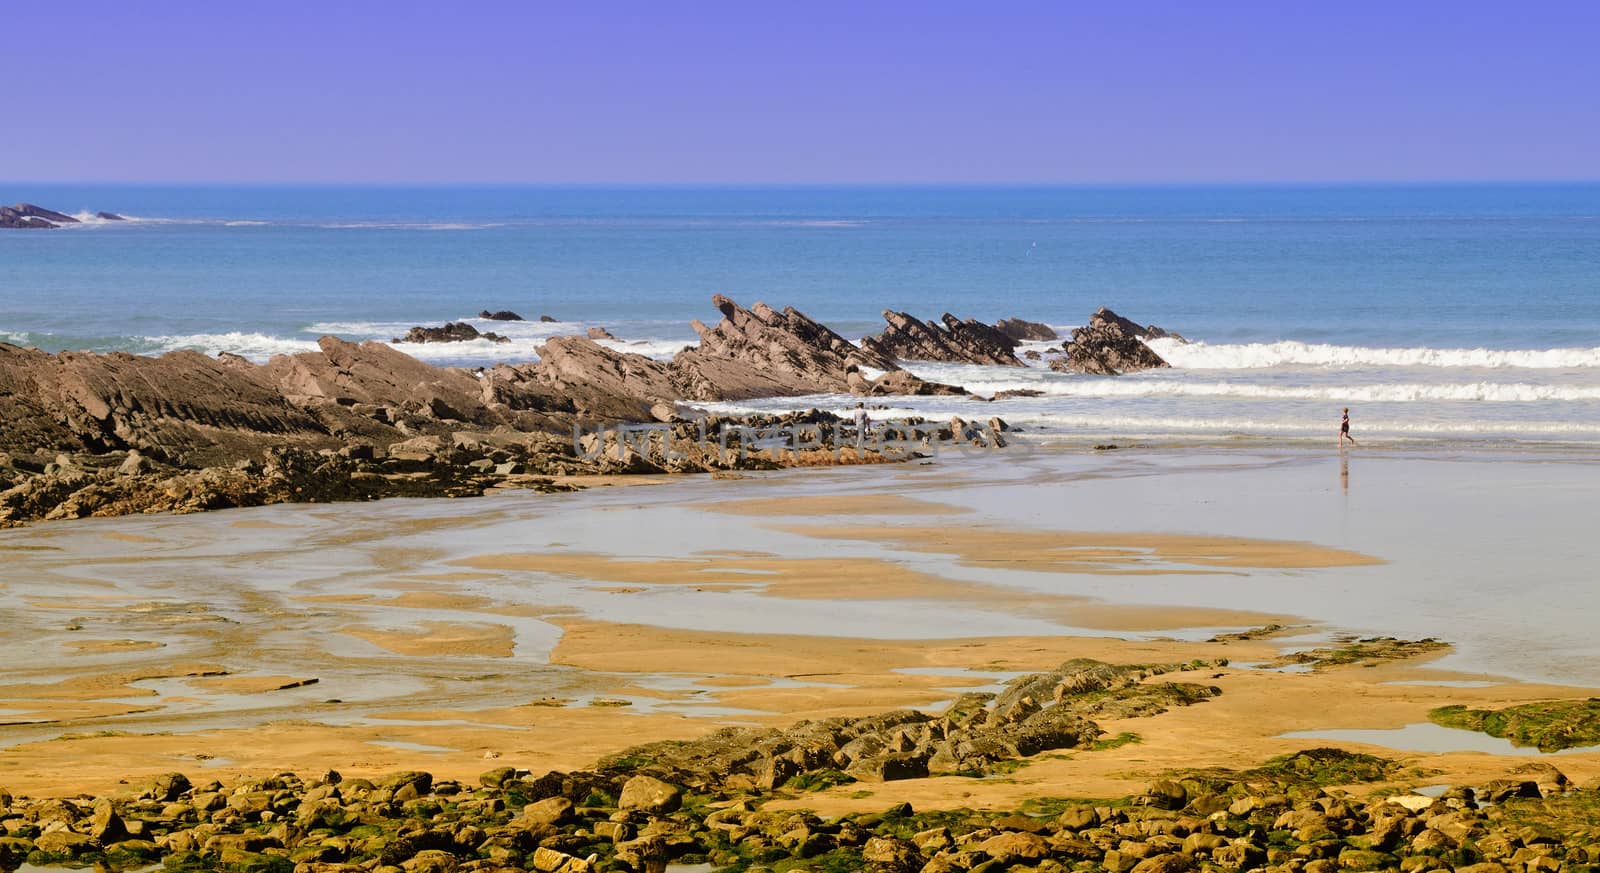 Both Panoramic and some more detailed images of beautiful Coastal scenes.